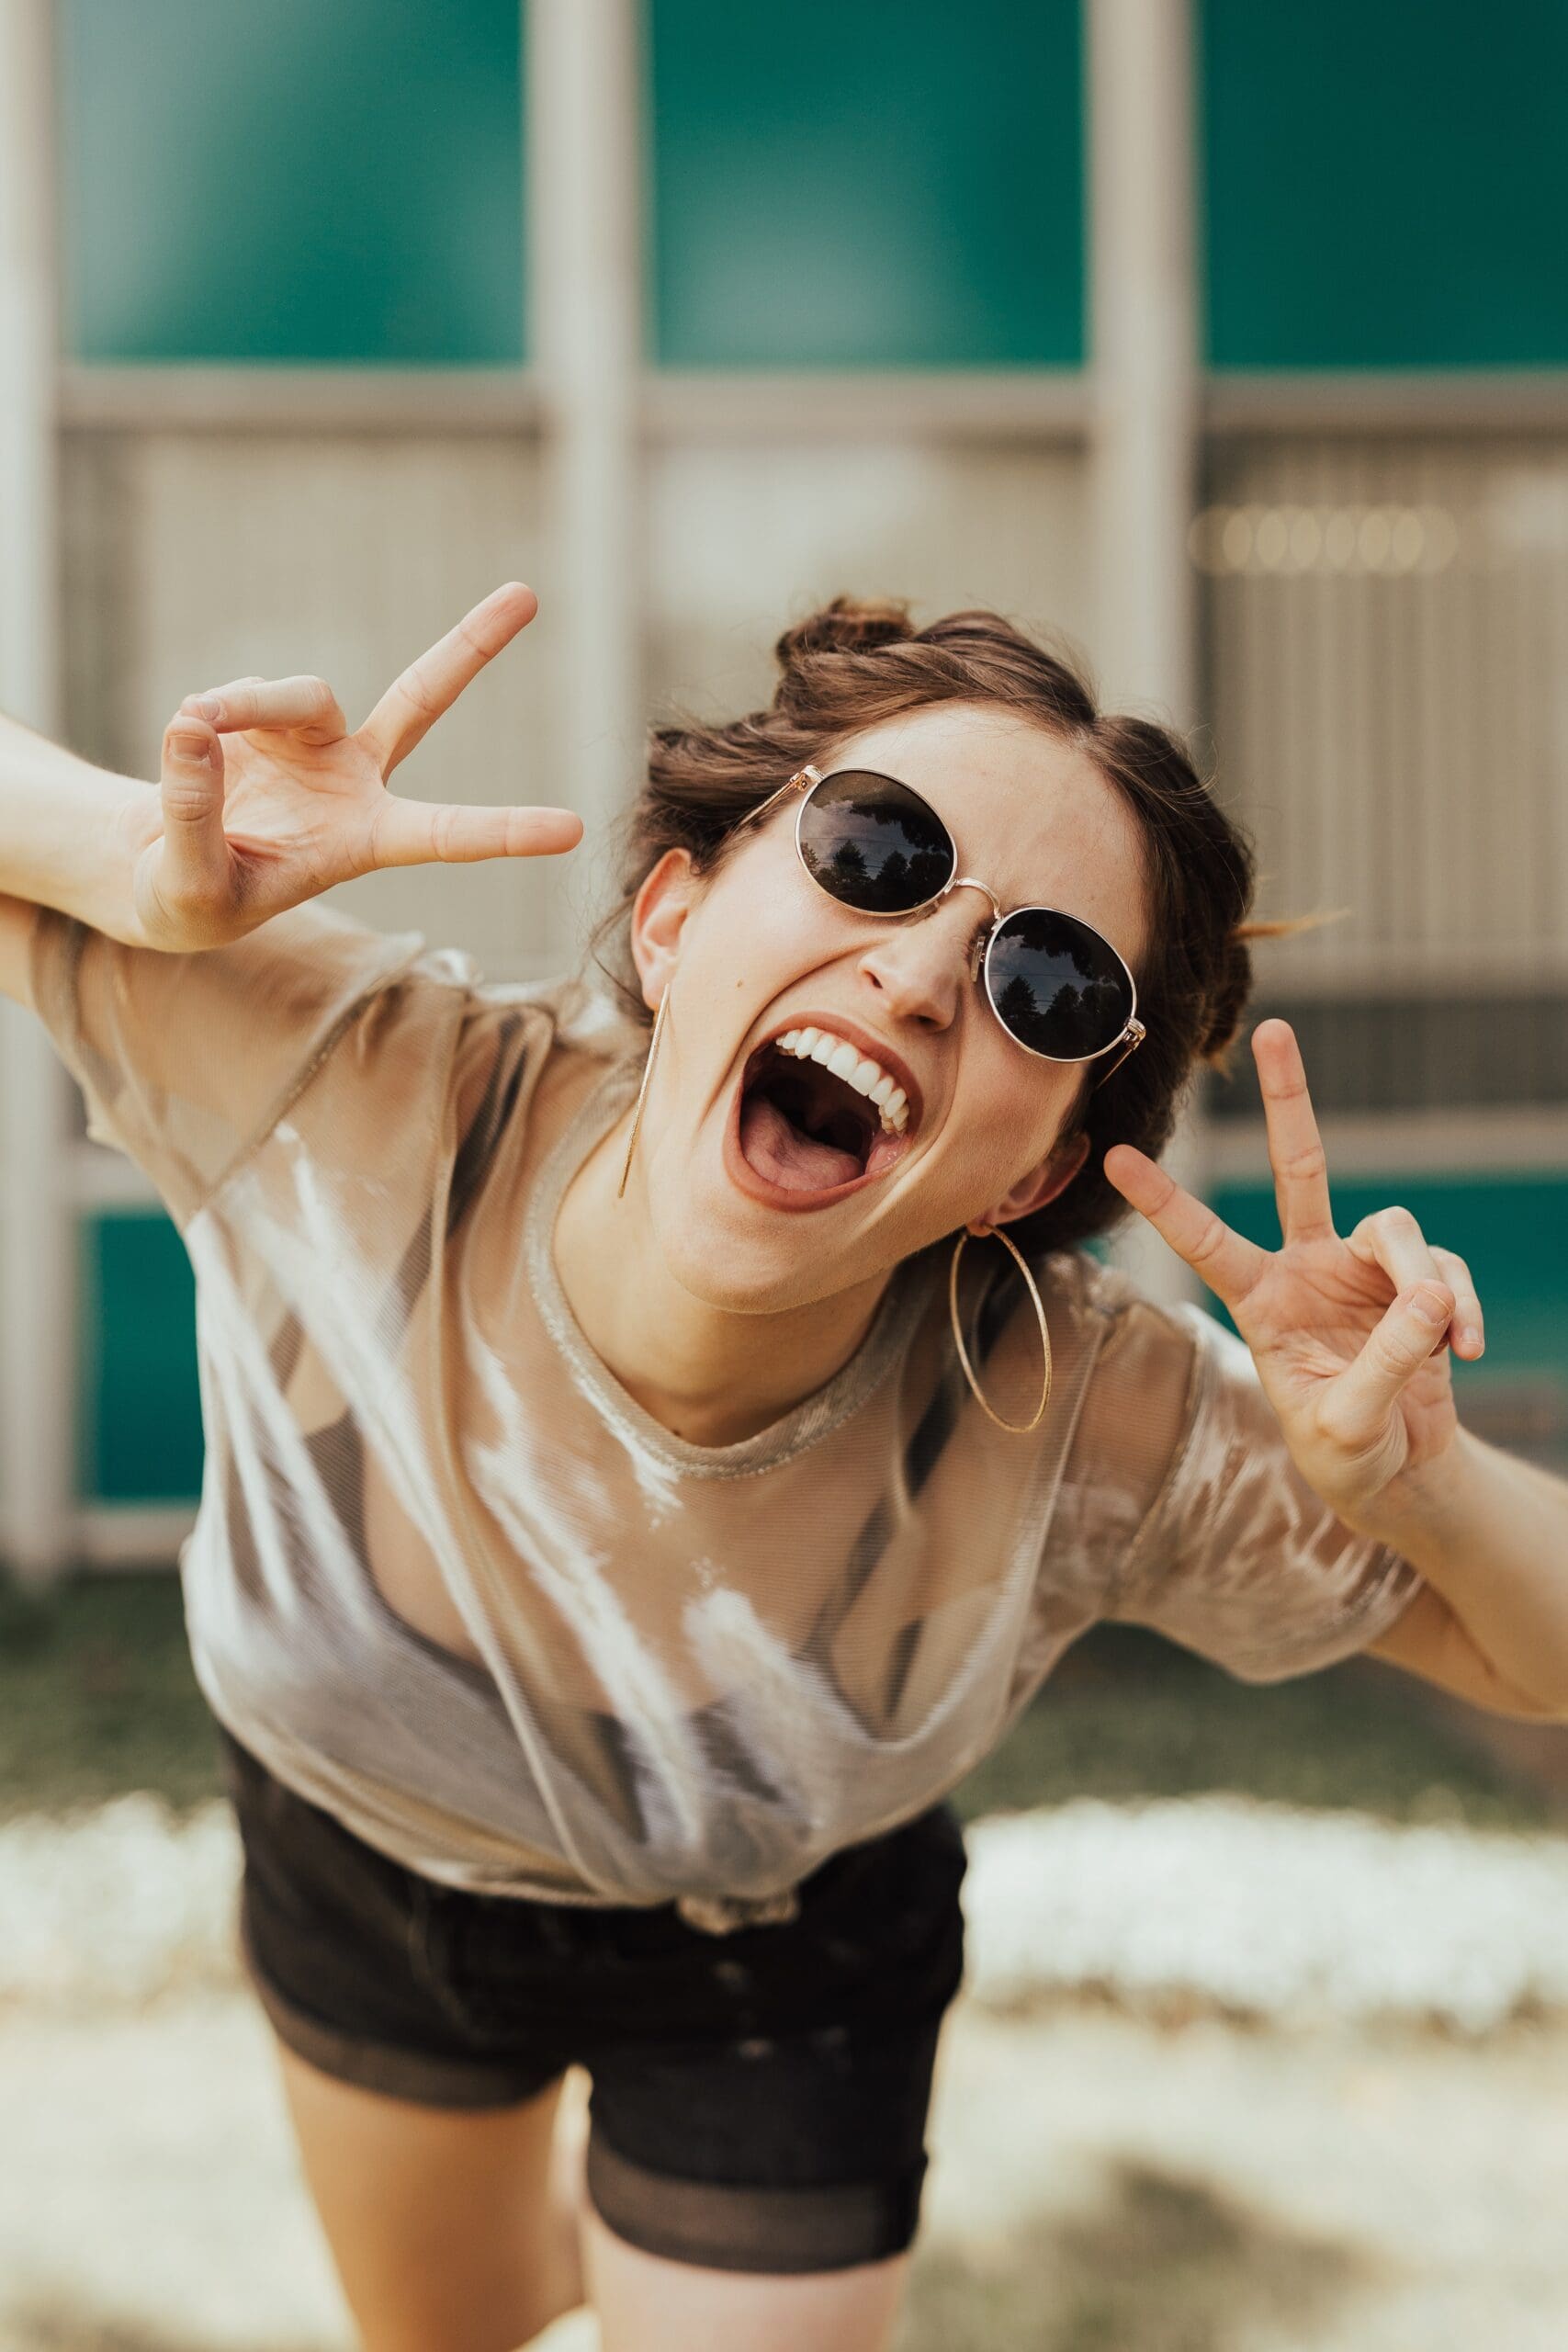 young woman with sunglasses laughing at camera